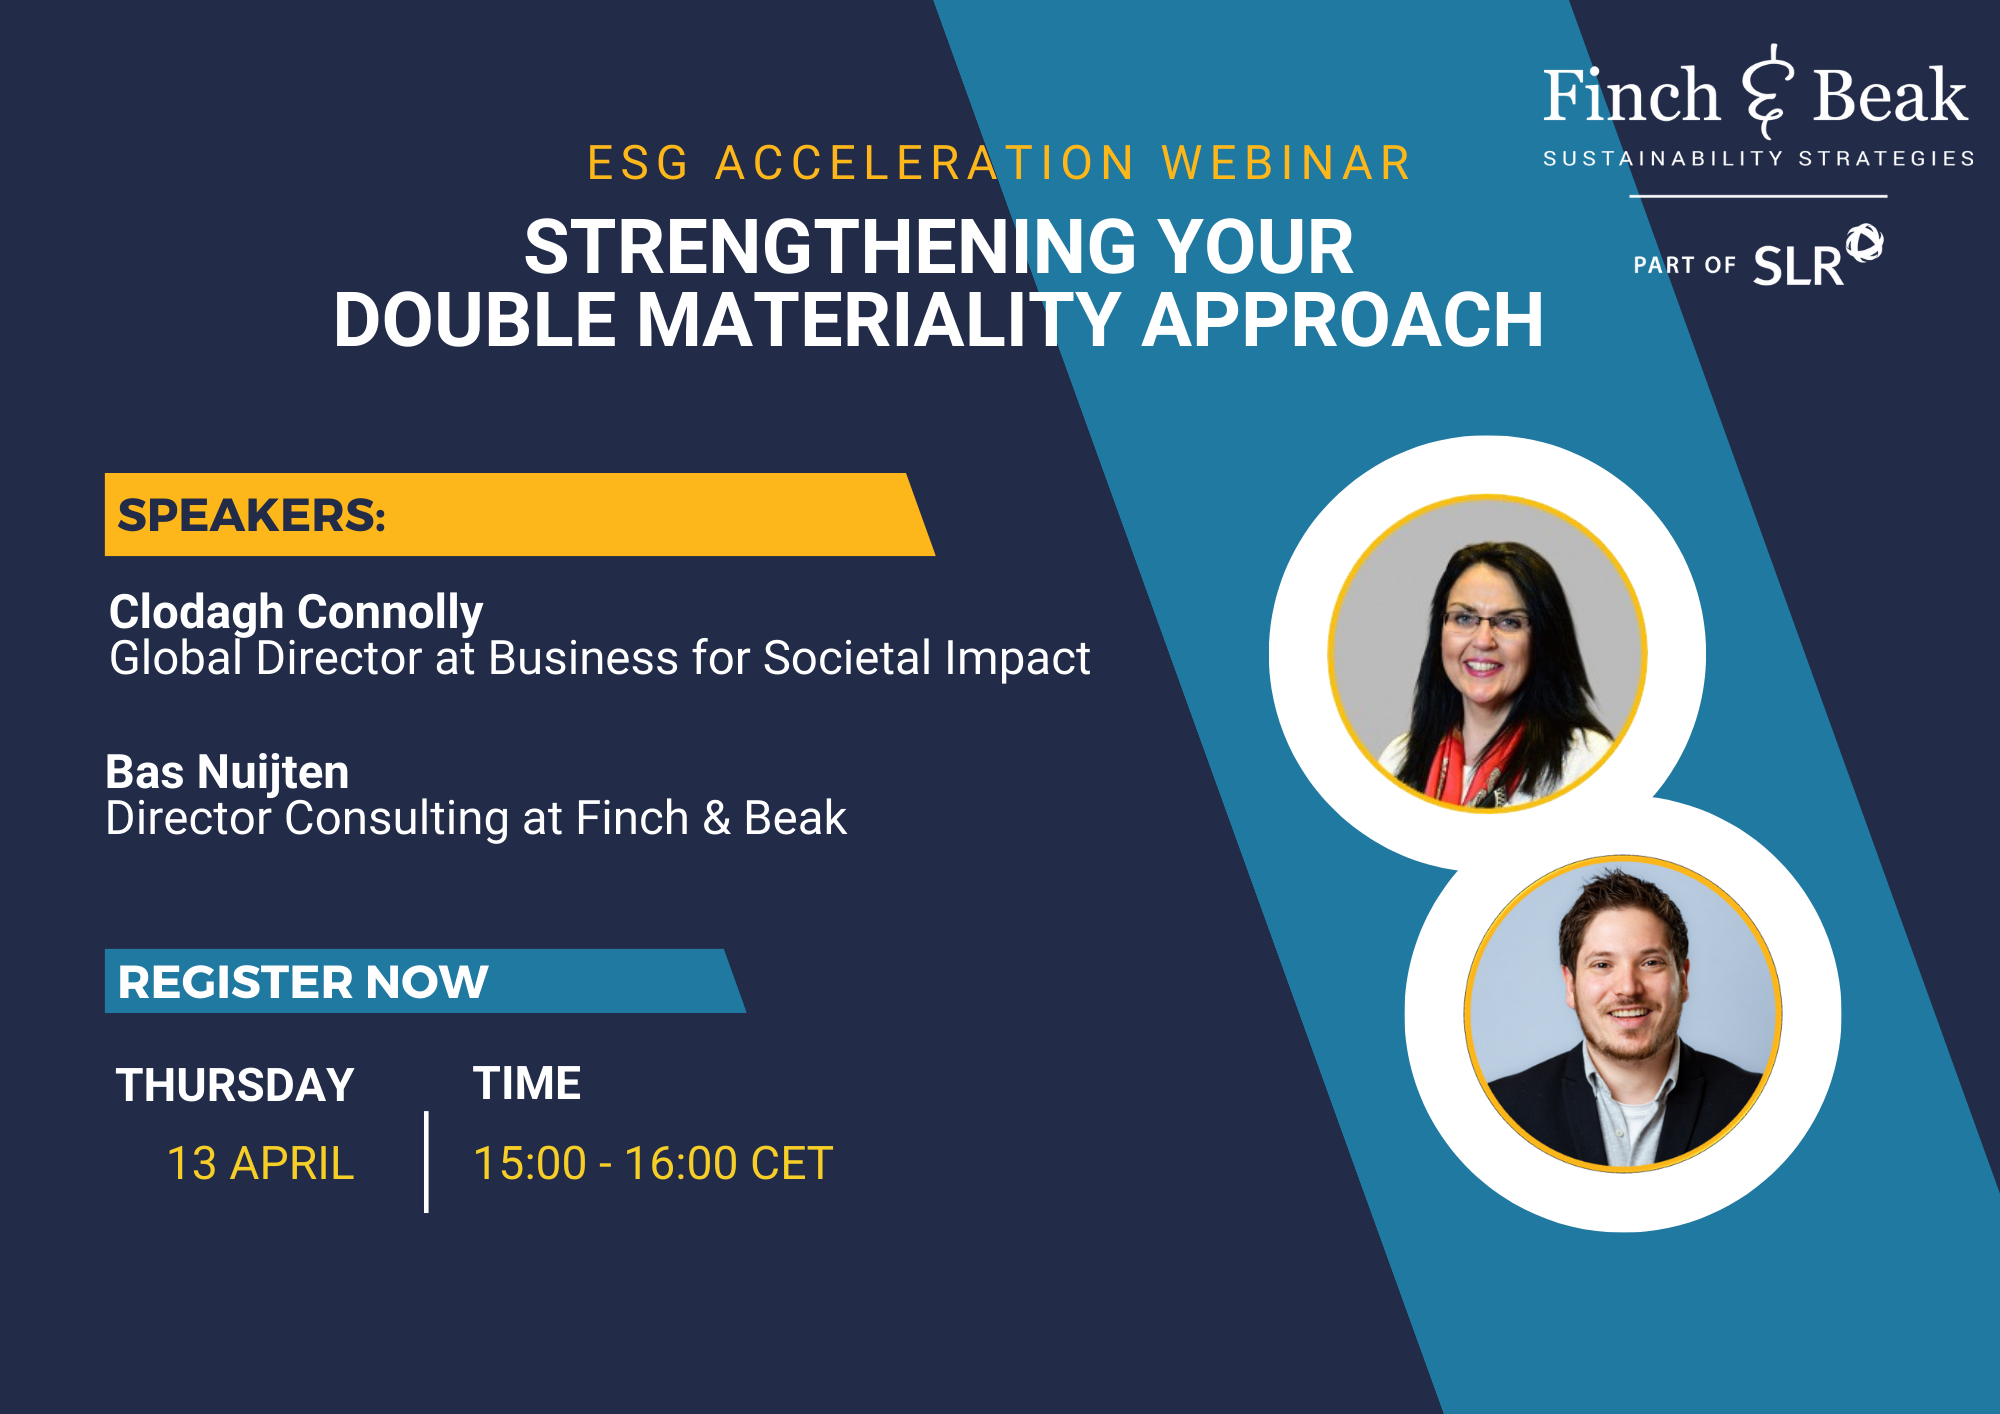 ESG Acceleration Webinar: Strengthening Your Double Materiality Approach